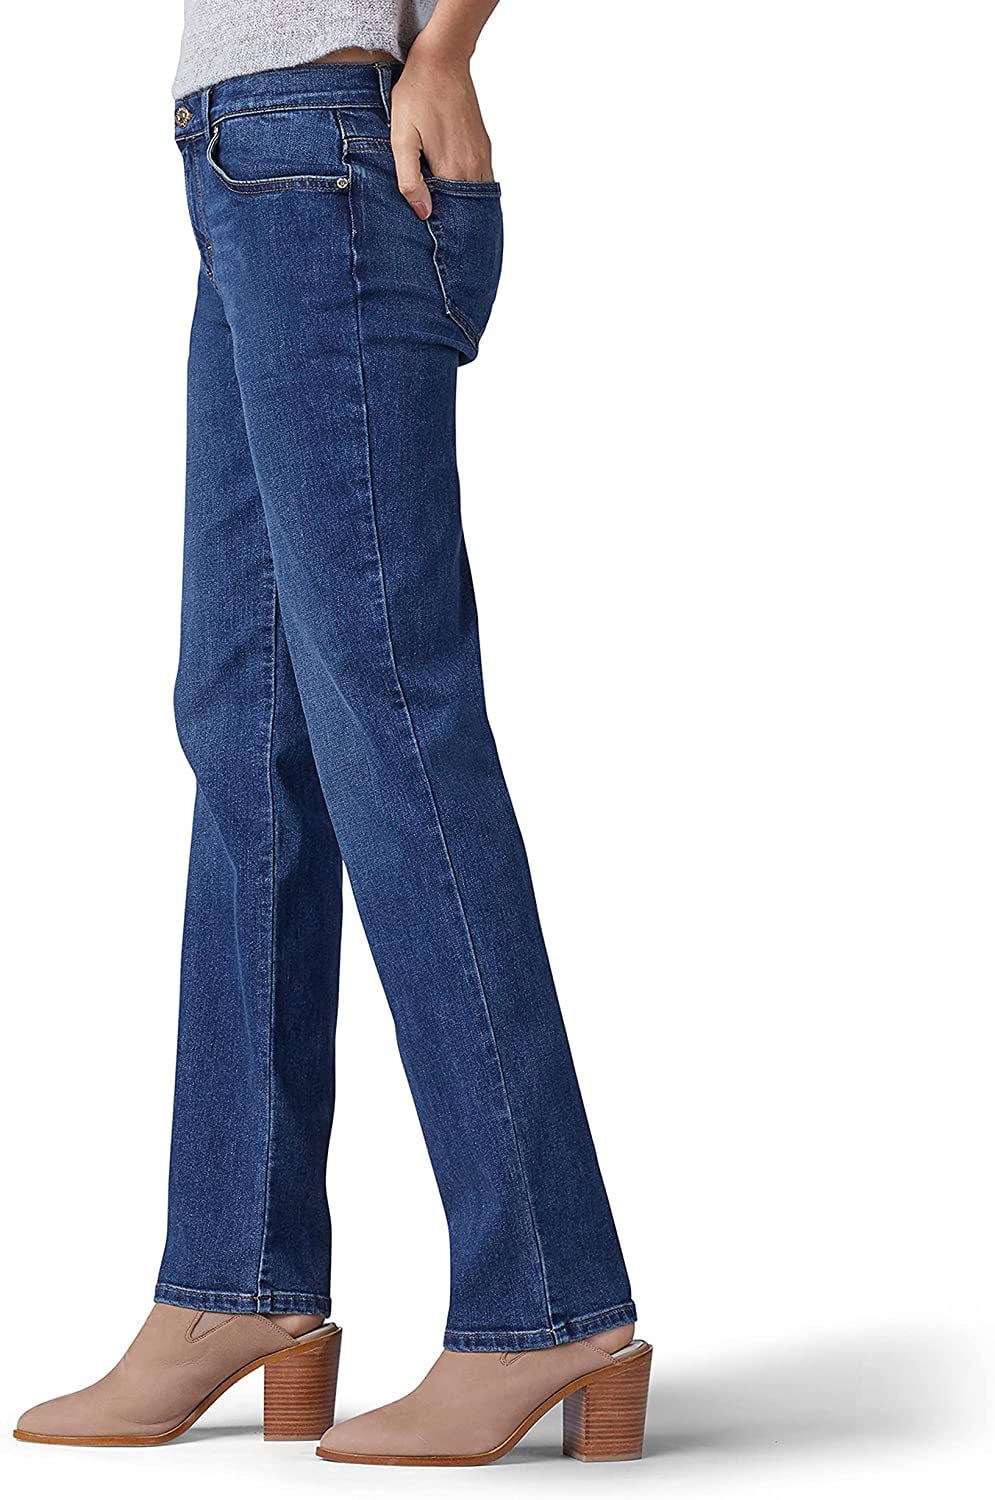 6 Best Straight Leg Jeans for Petites - Lake Shore Lady  Jeans for short  legs, Women's straight jeans, Straight jeans outfit